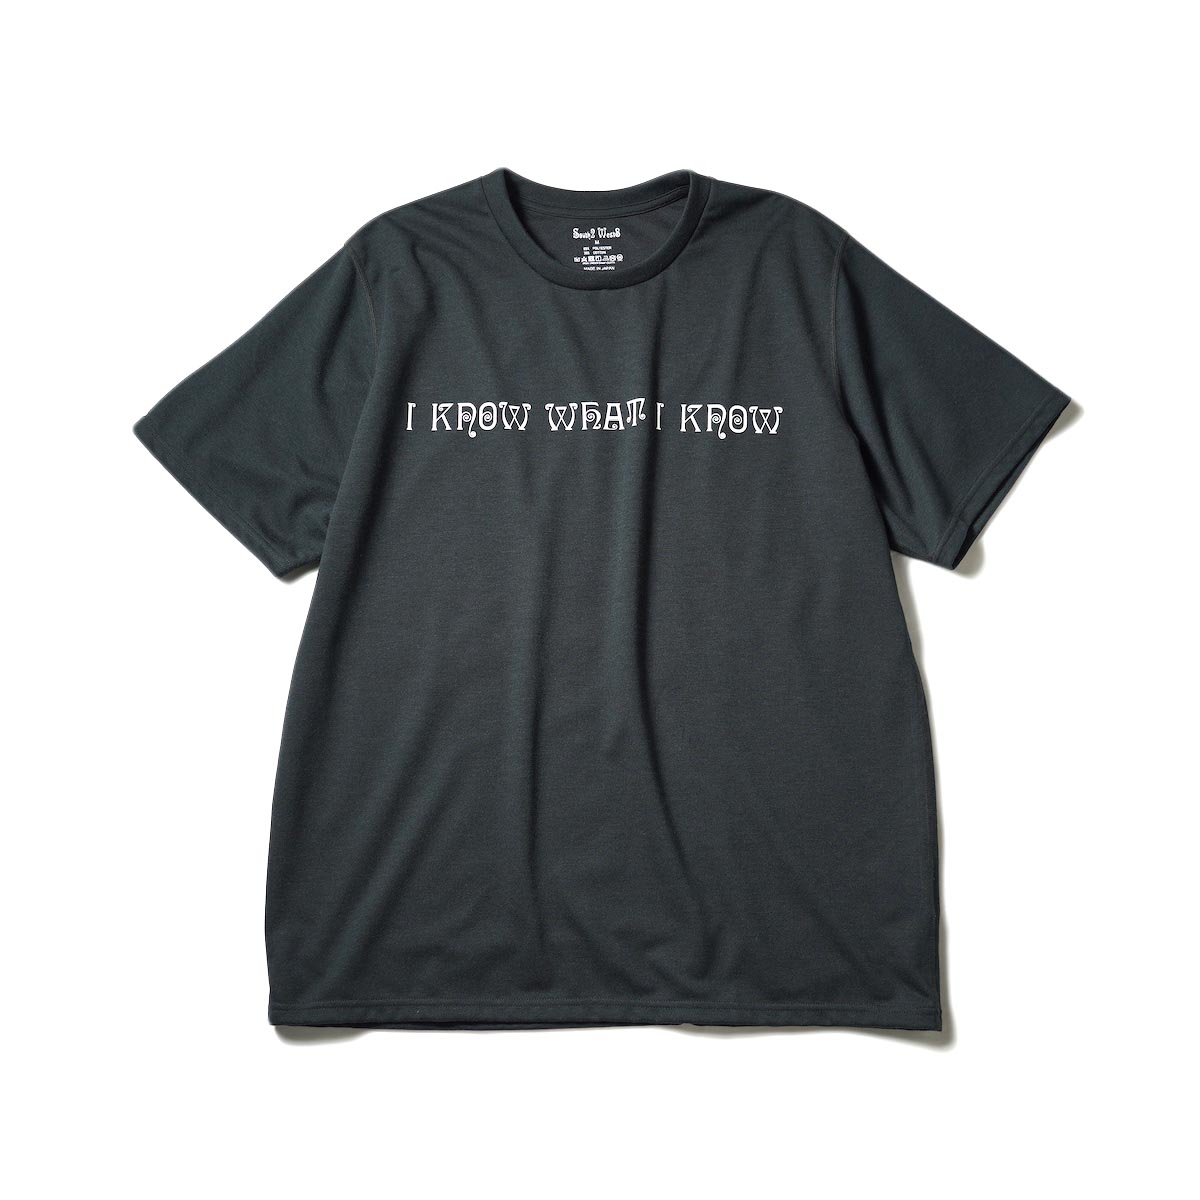 South2 West8 / S/S CREW NECK TEE - I KNOW WHAT KNOW (Black)